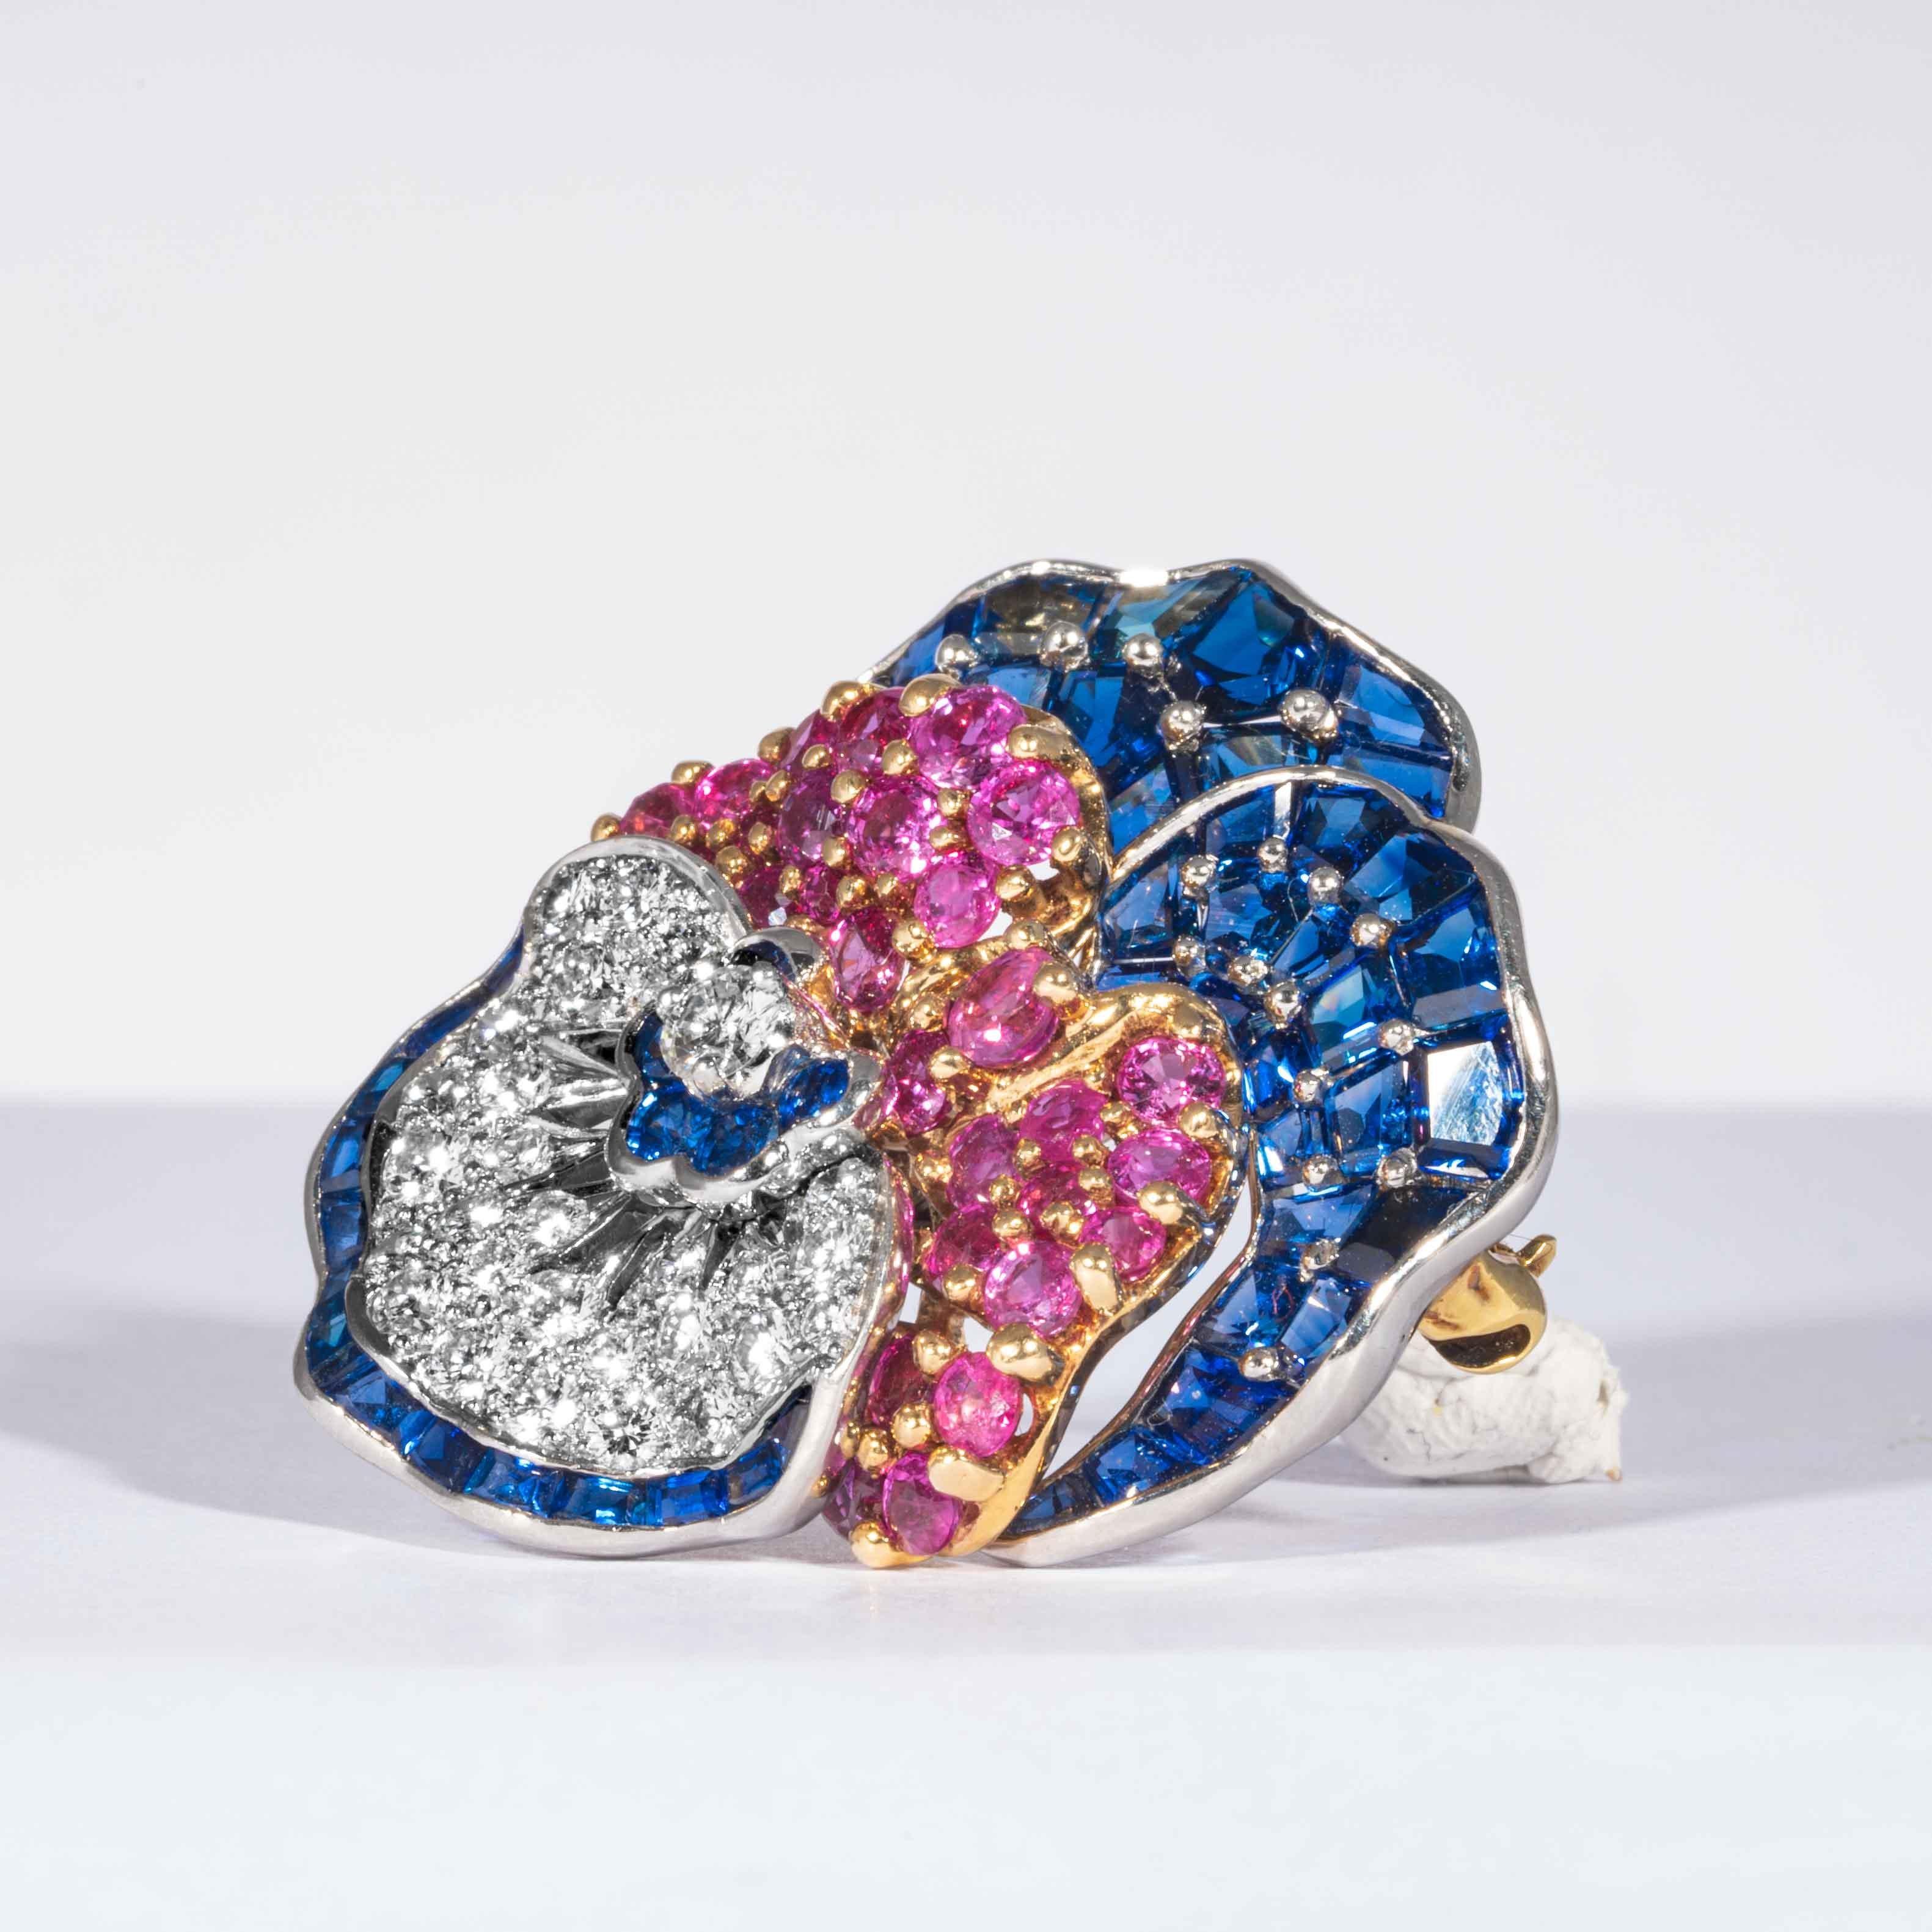 Brilliant Cut Sapphire and Diamond Pansy Pin, Signed Tiffany & Co. by Oscar Heyman Brothers For Sale